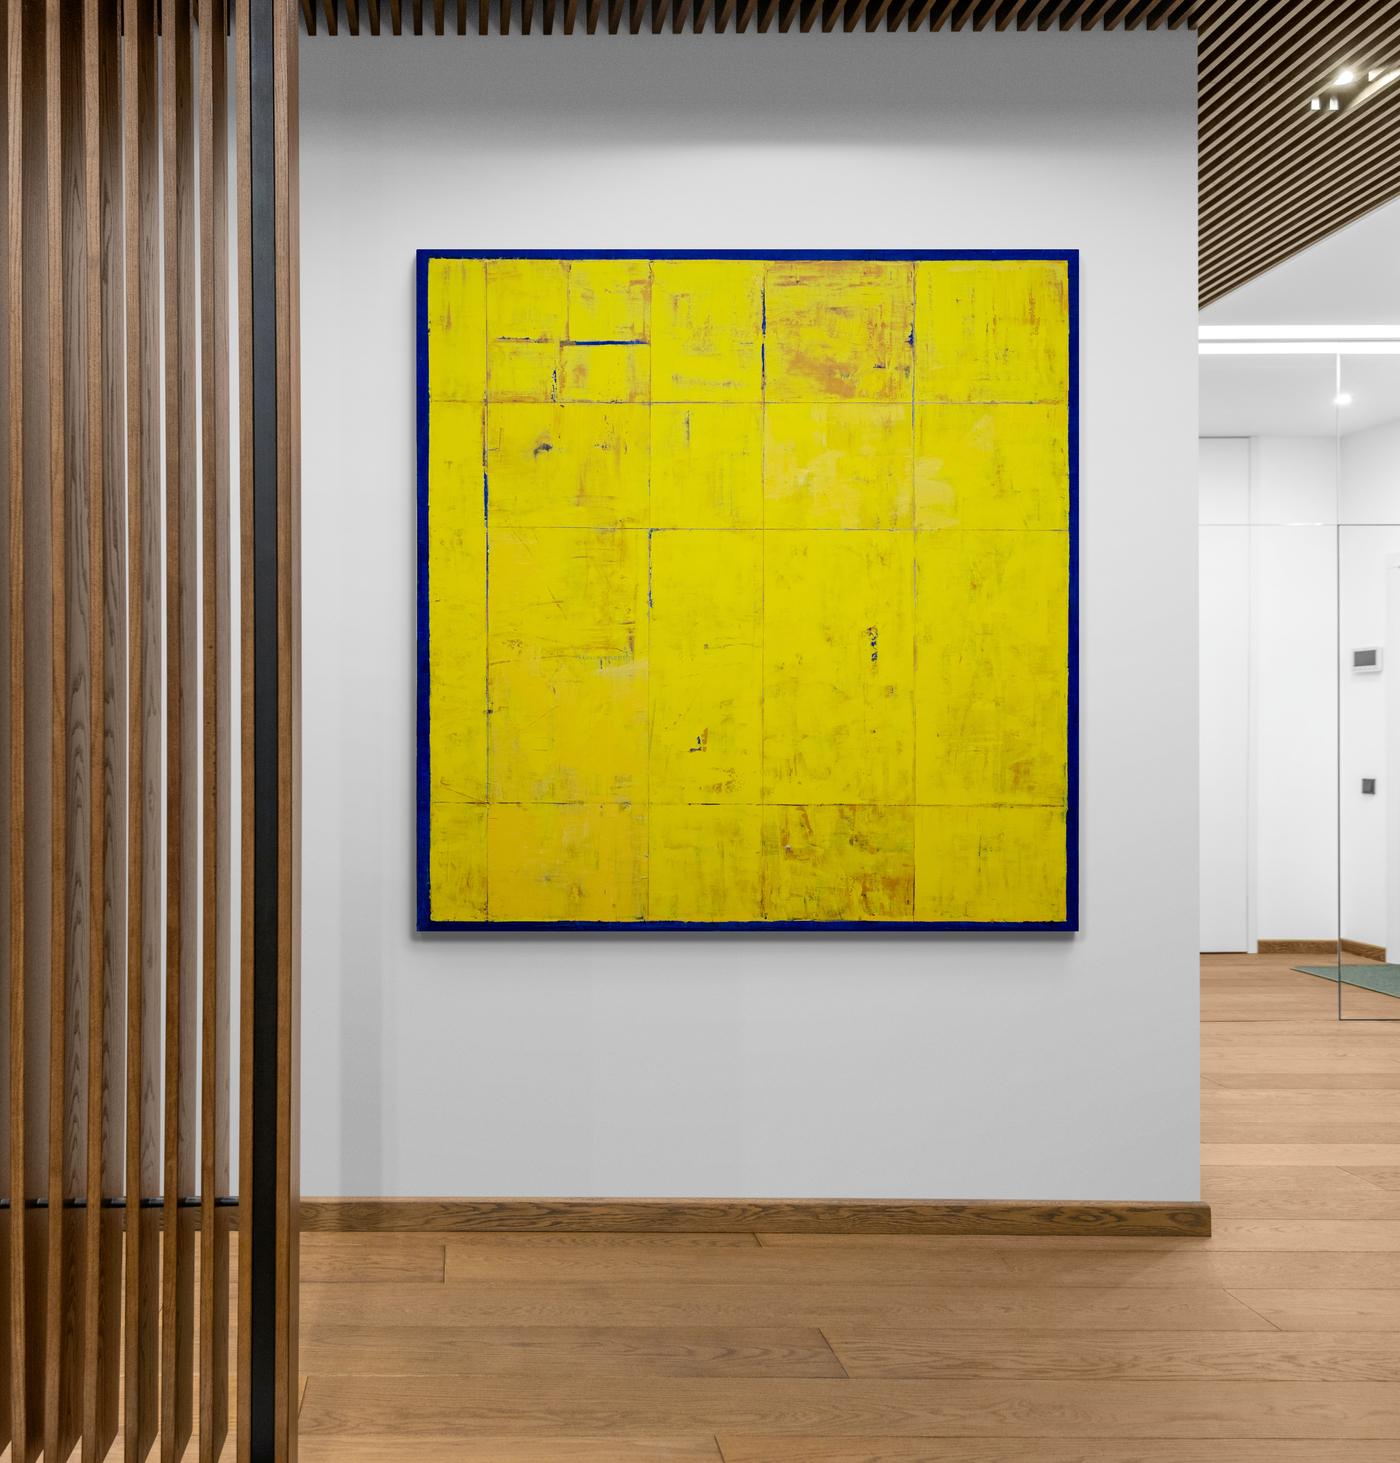 Amida - large, bright, colorful, yellow, abstract grid, modernist, oil on canvas 8